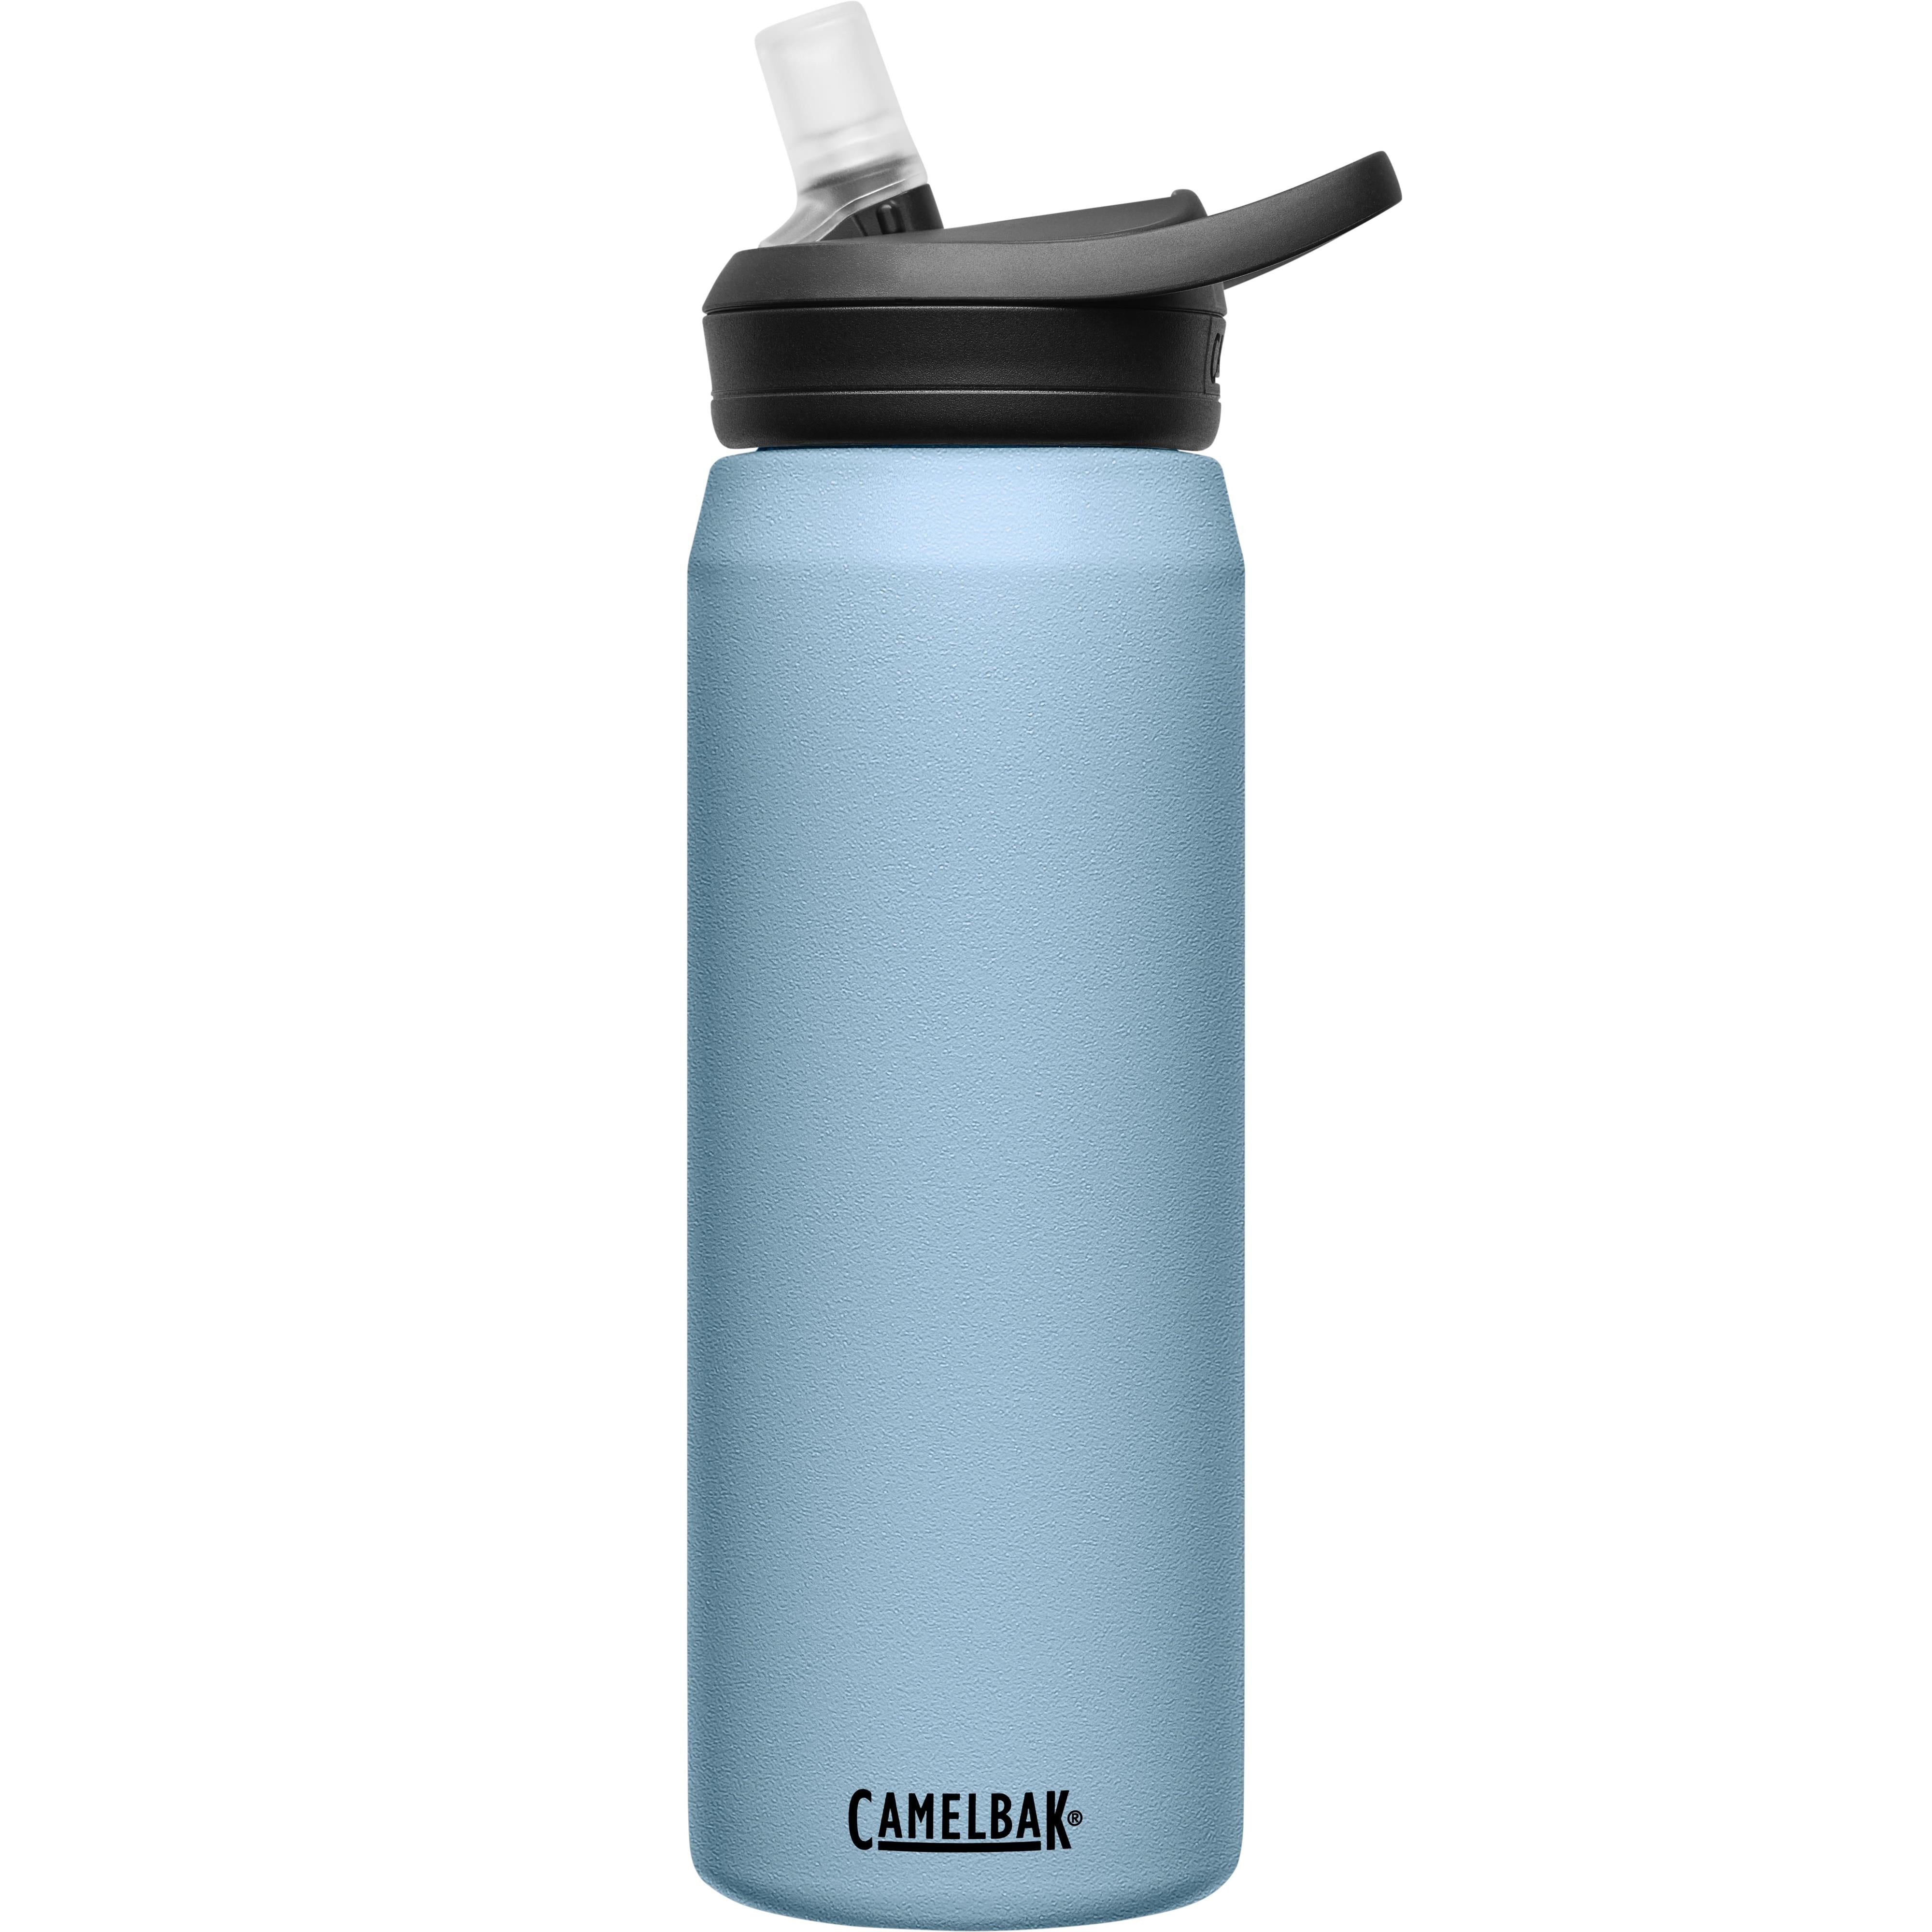 GOURDE ISOTHERME BETTER IN THE MOUNTAINS Flasks - Flasks